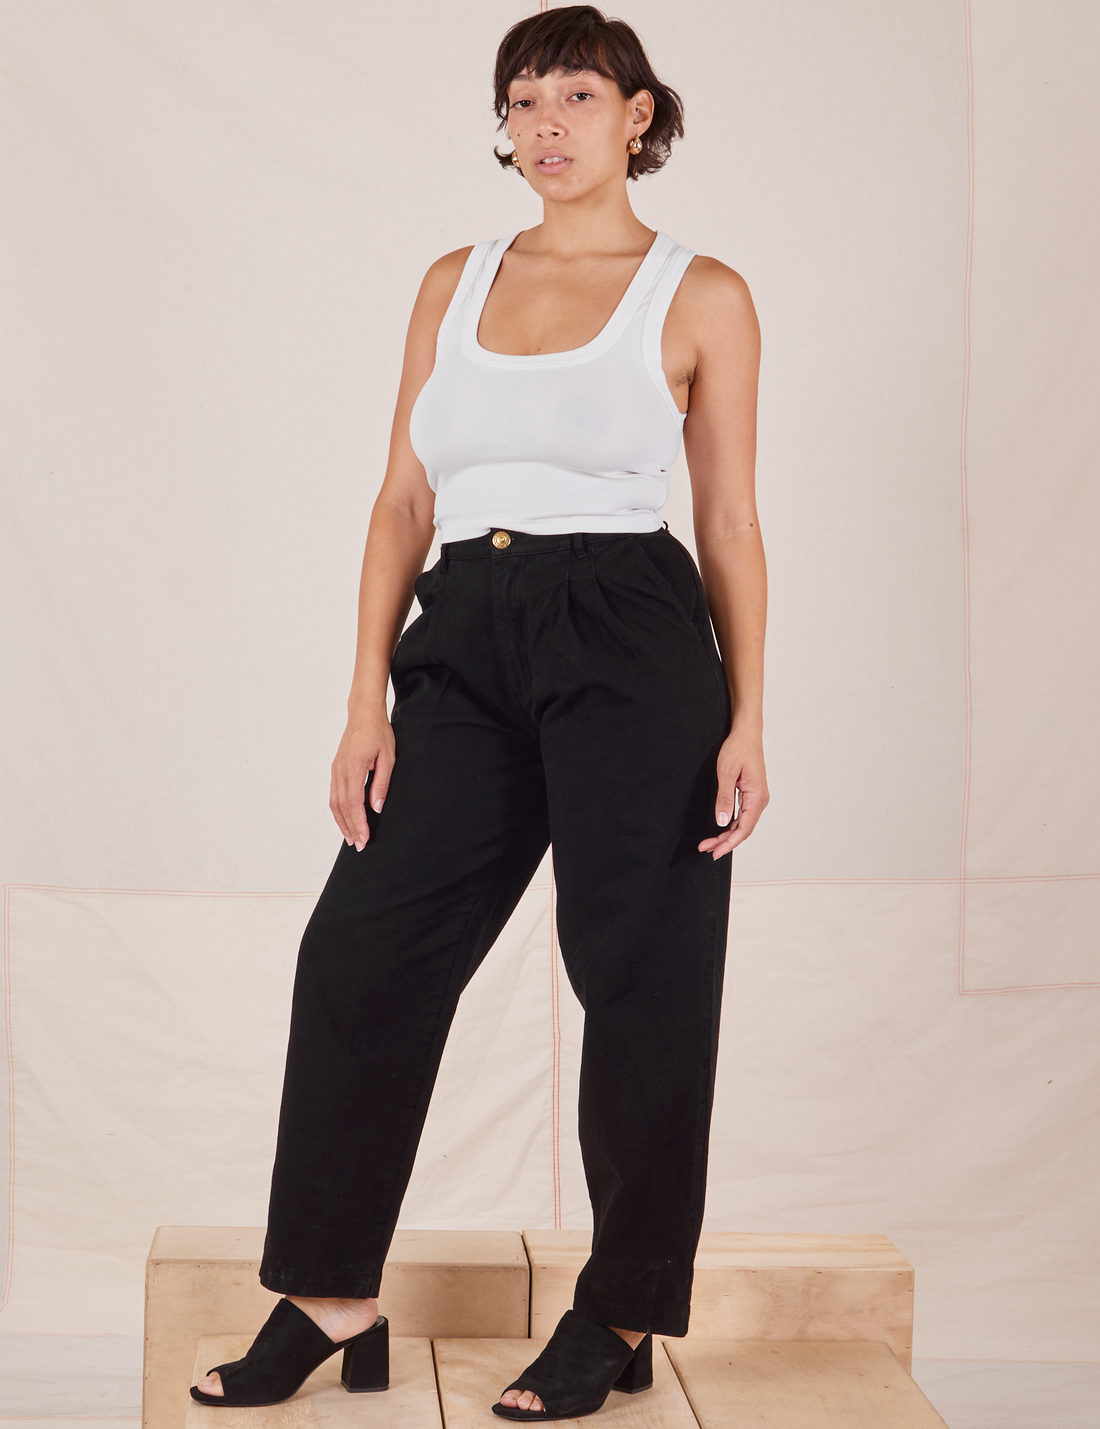 Tiara is 5'4" and wearing S Heavyweight Trousers in Basic Black paired with vintage off-white Cropped Tank Top.